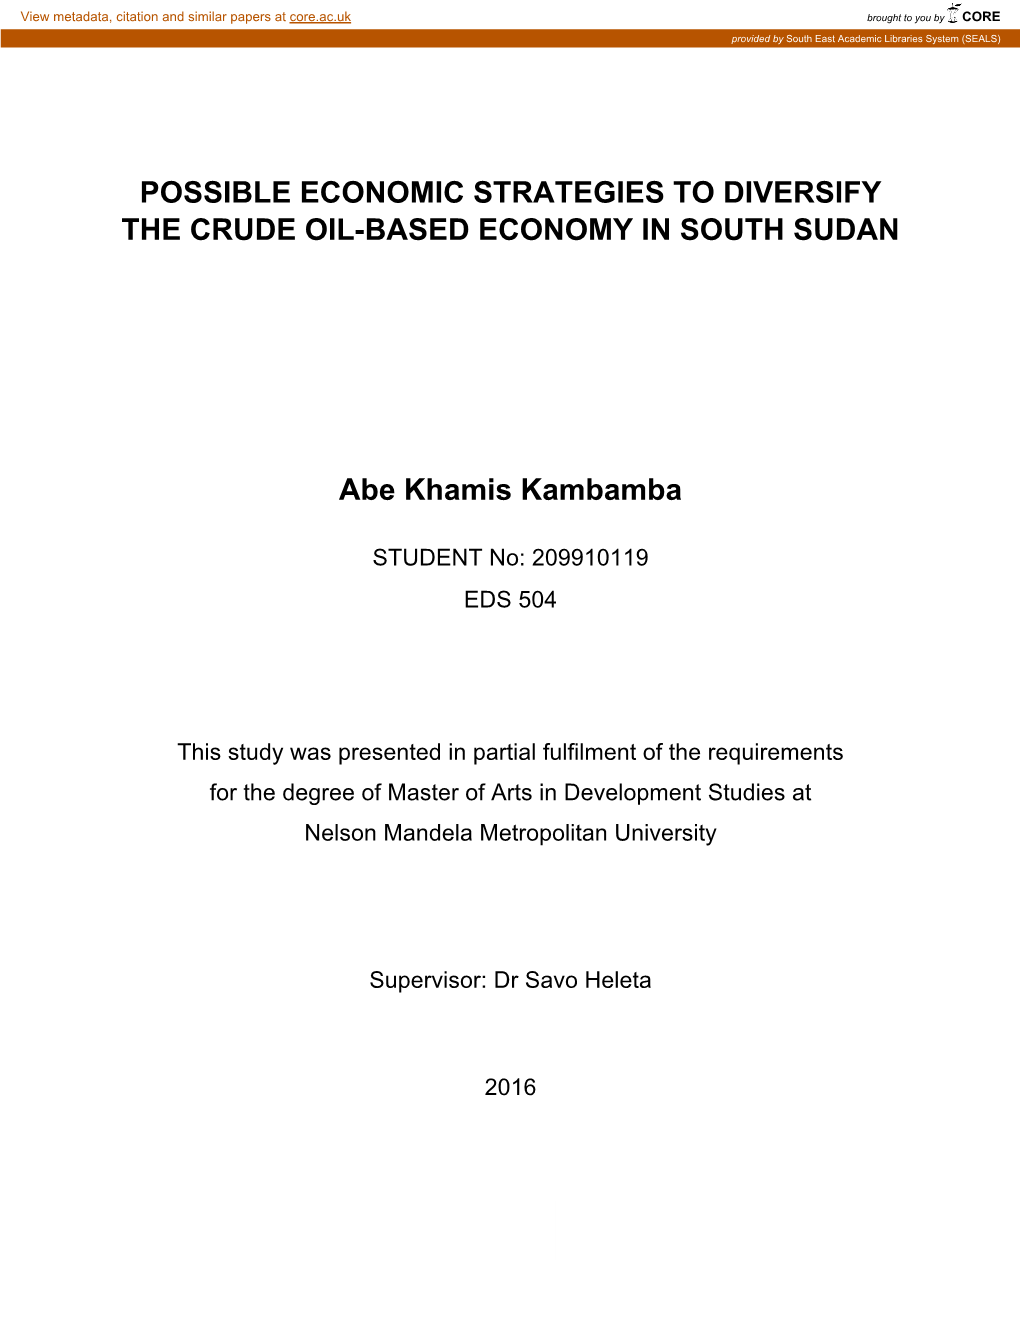 Possible Economic Strategies to Diversify the Crude Oil-Based Economy in South Sudan